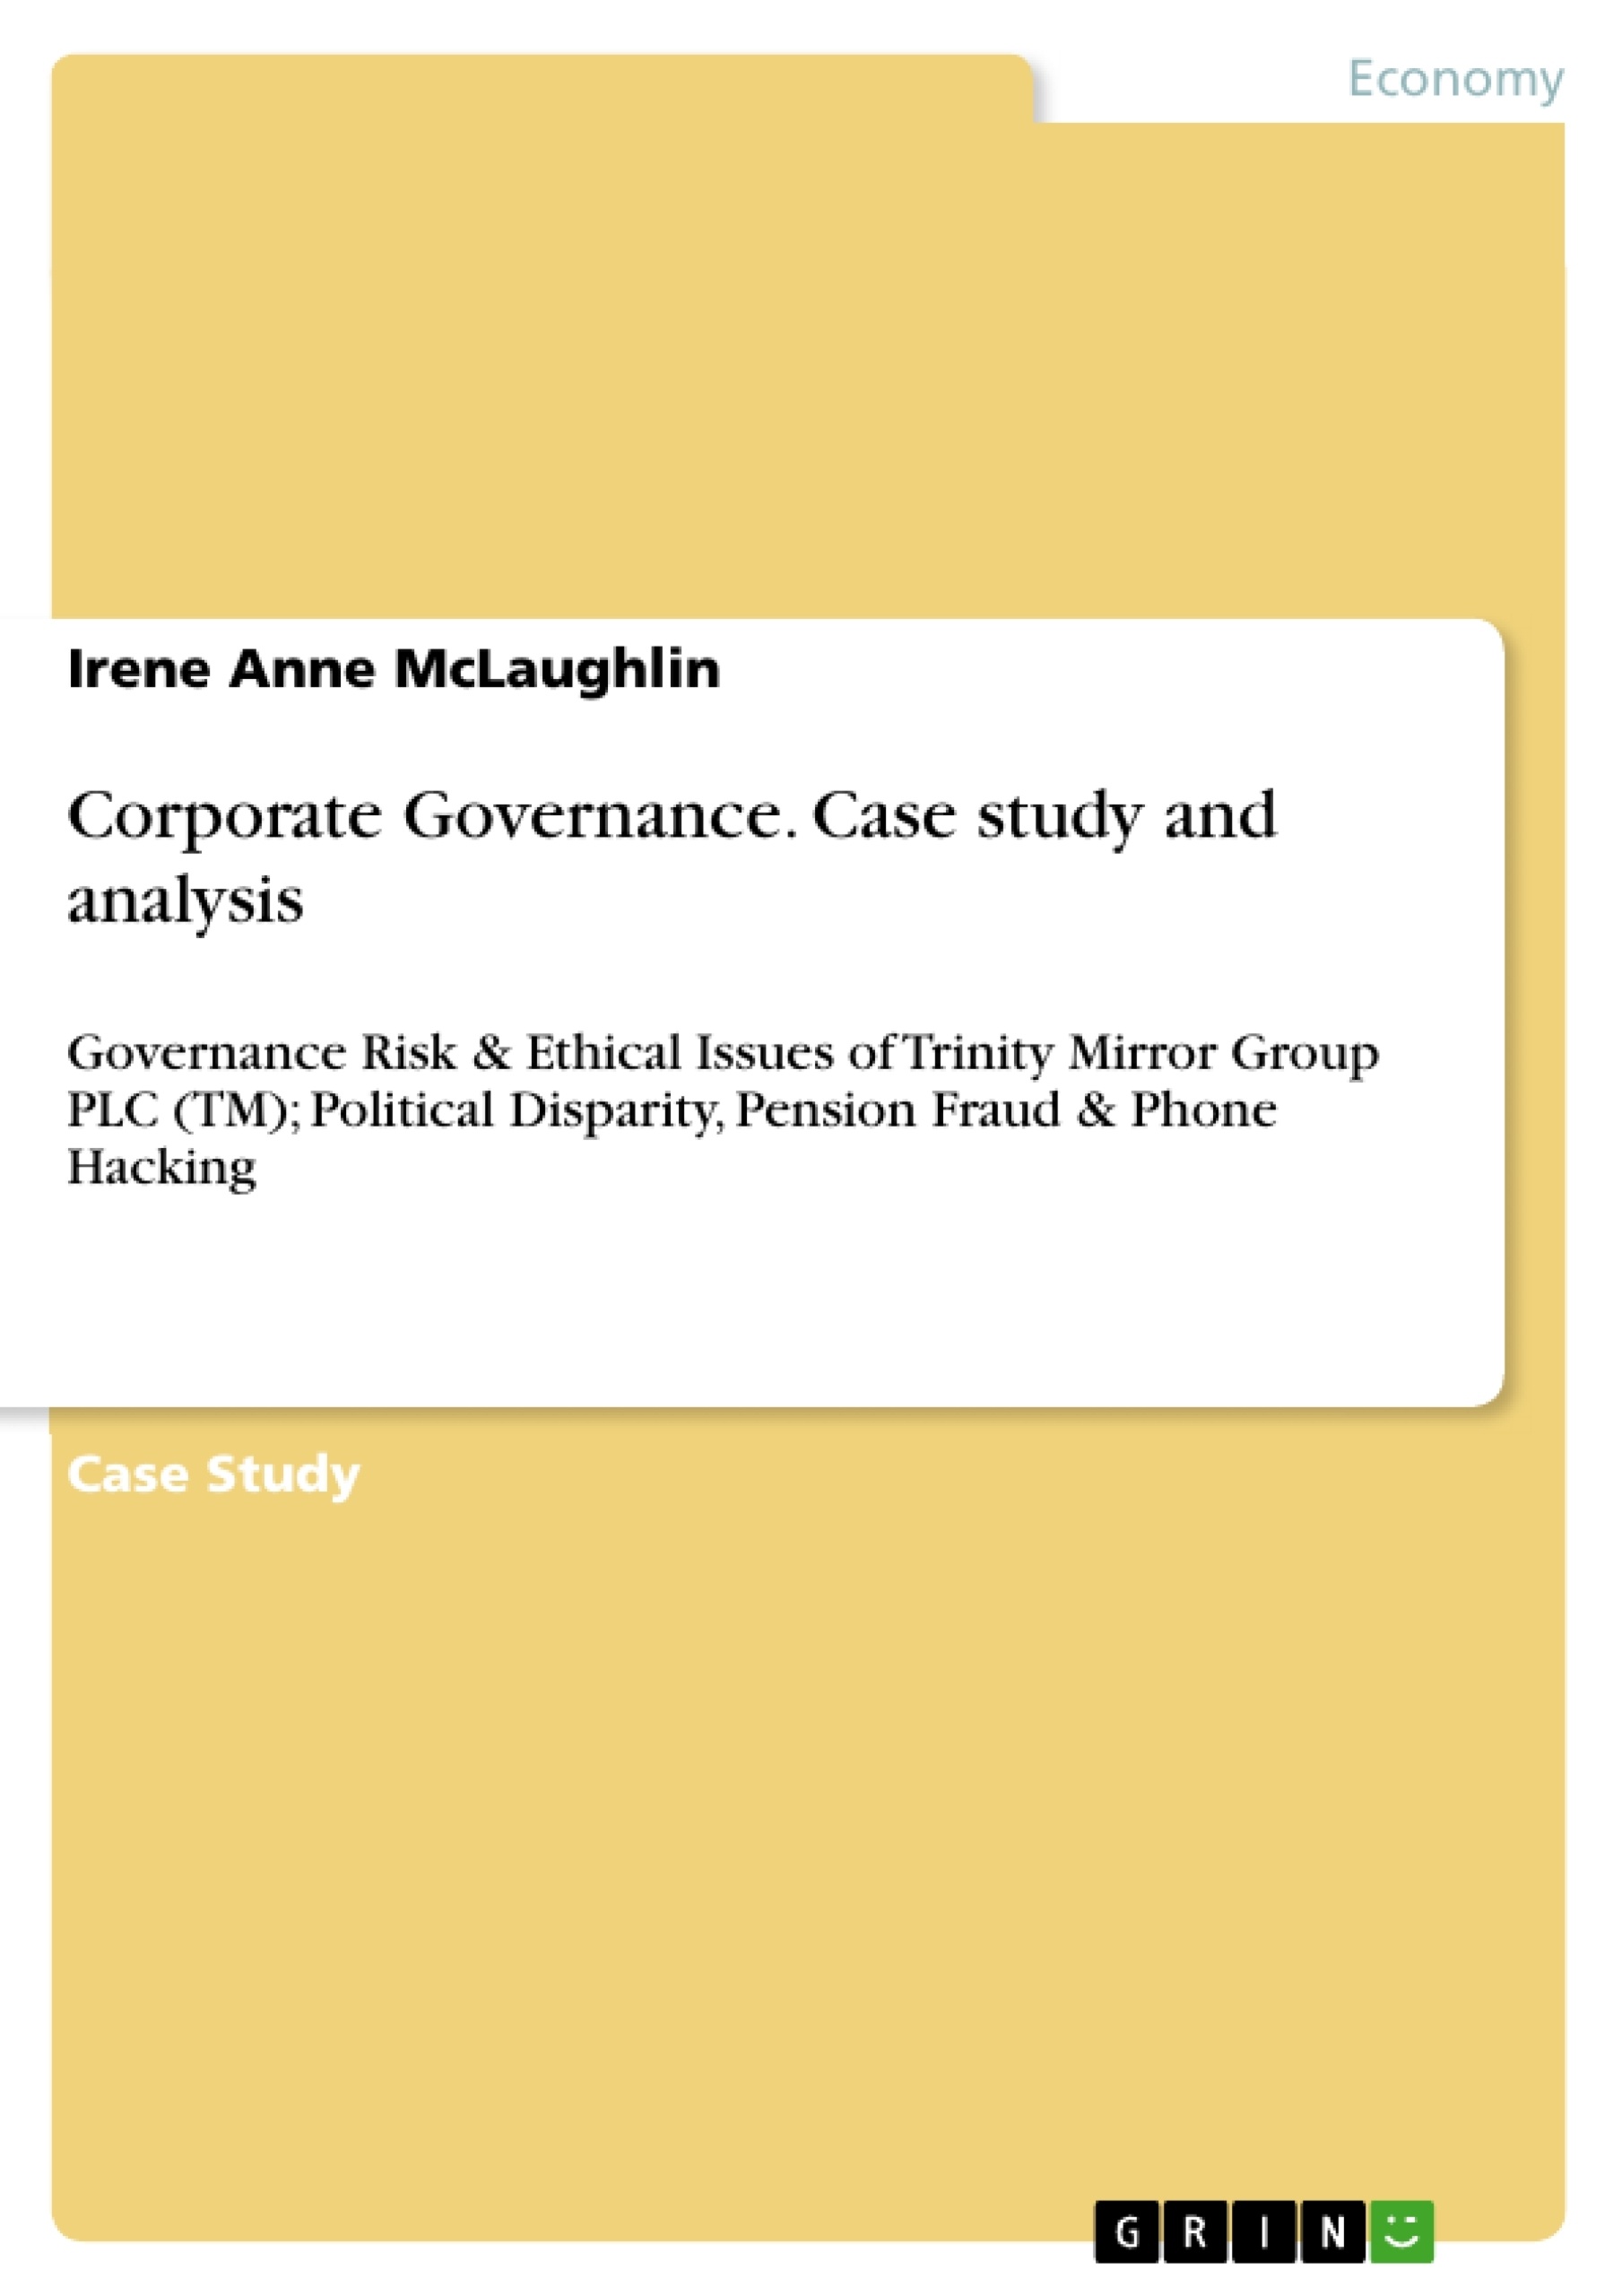 hbs case study corporate governance